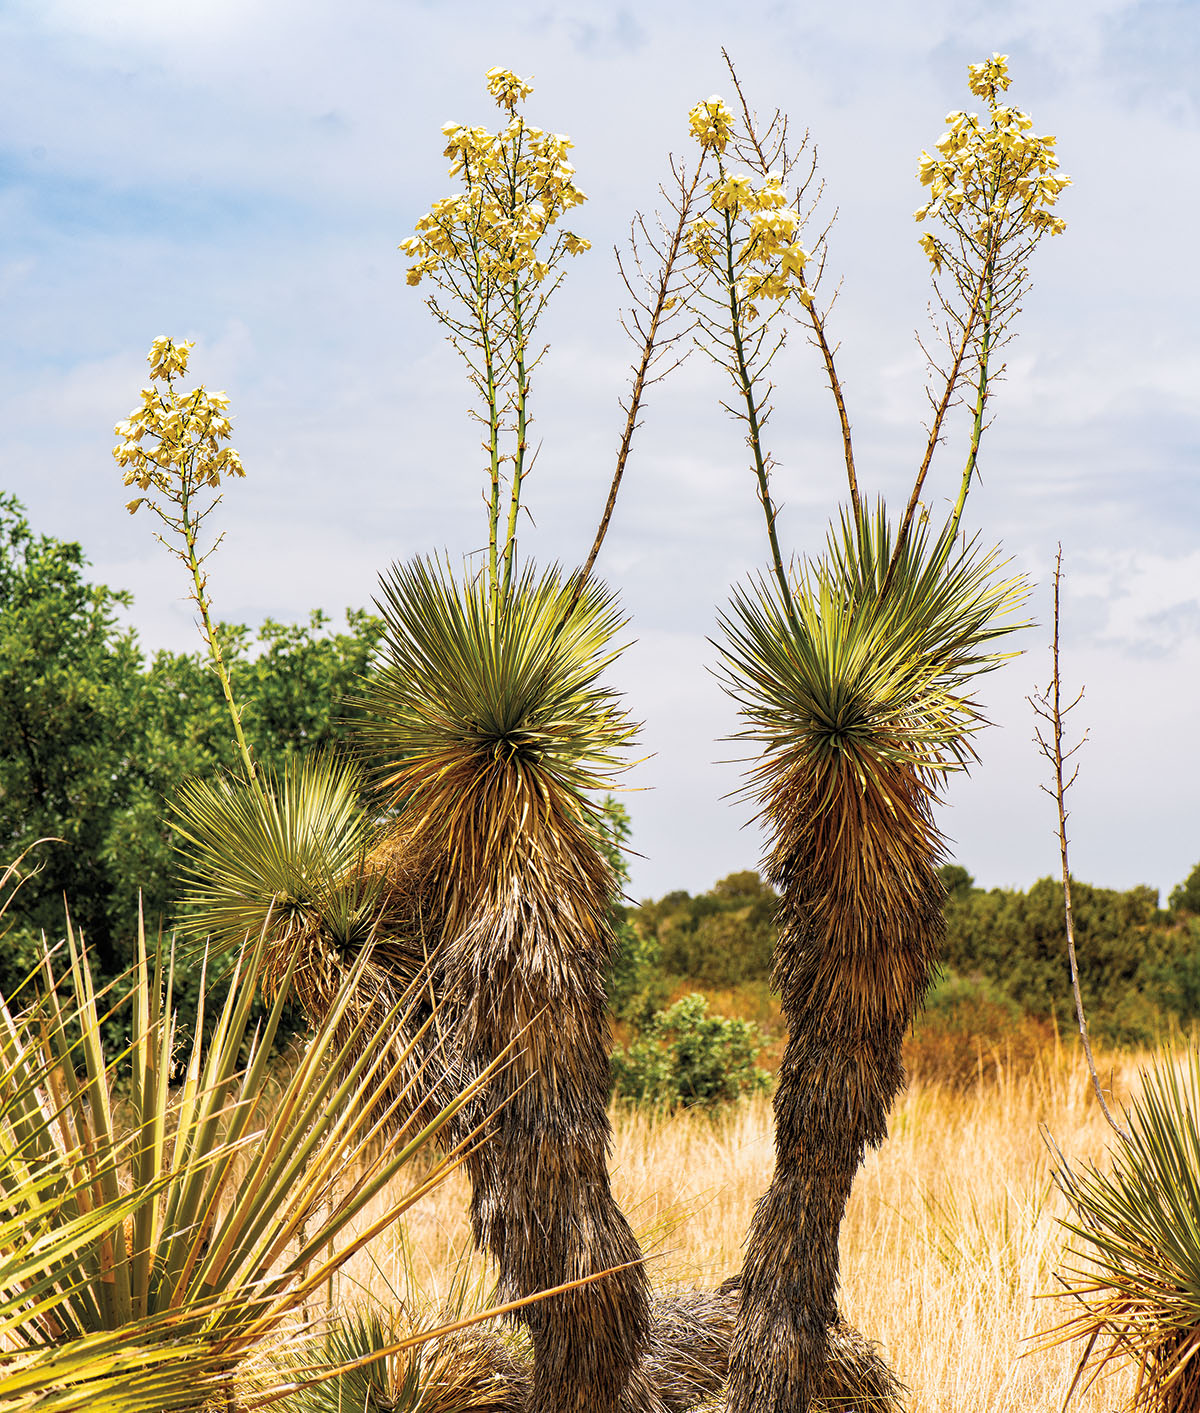 Two spindly dark cactus-looking plants with pointed tops and tall flowers in a desert scene